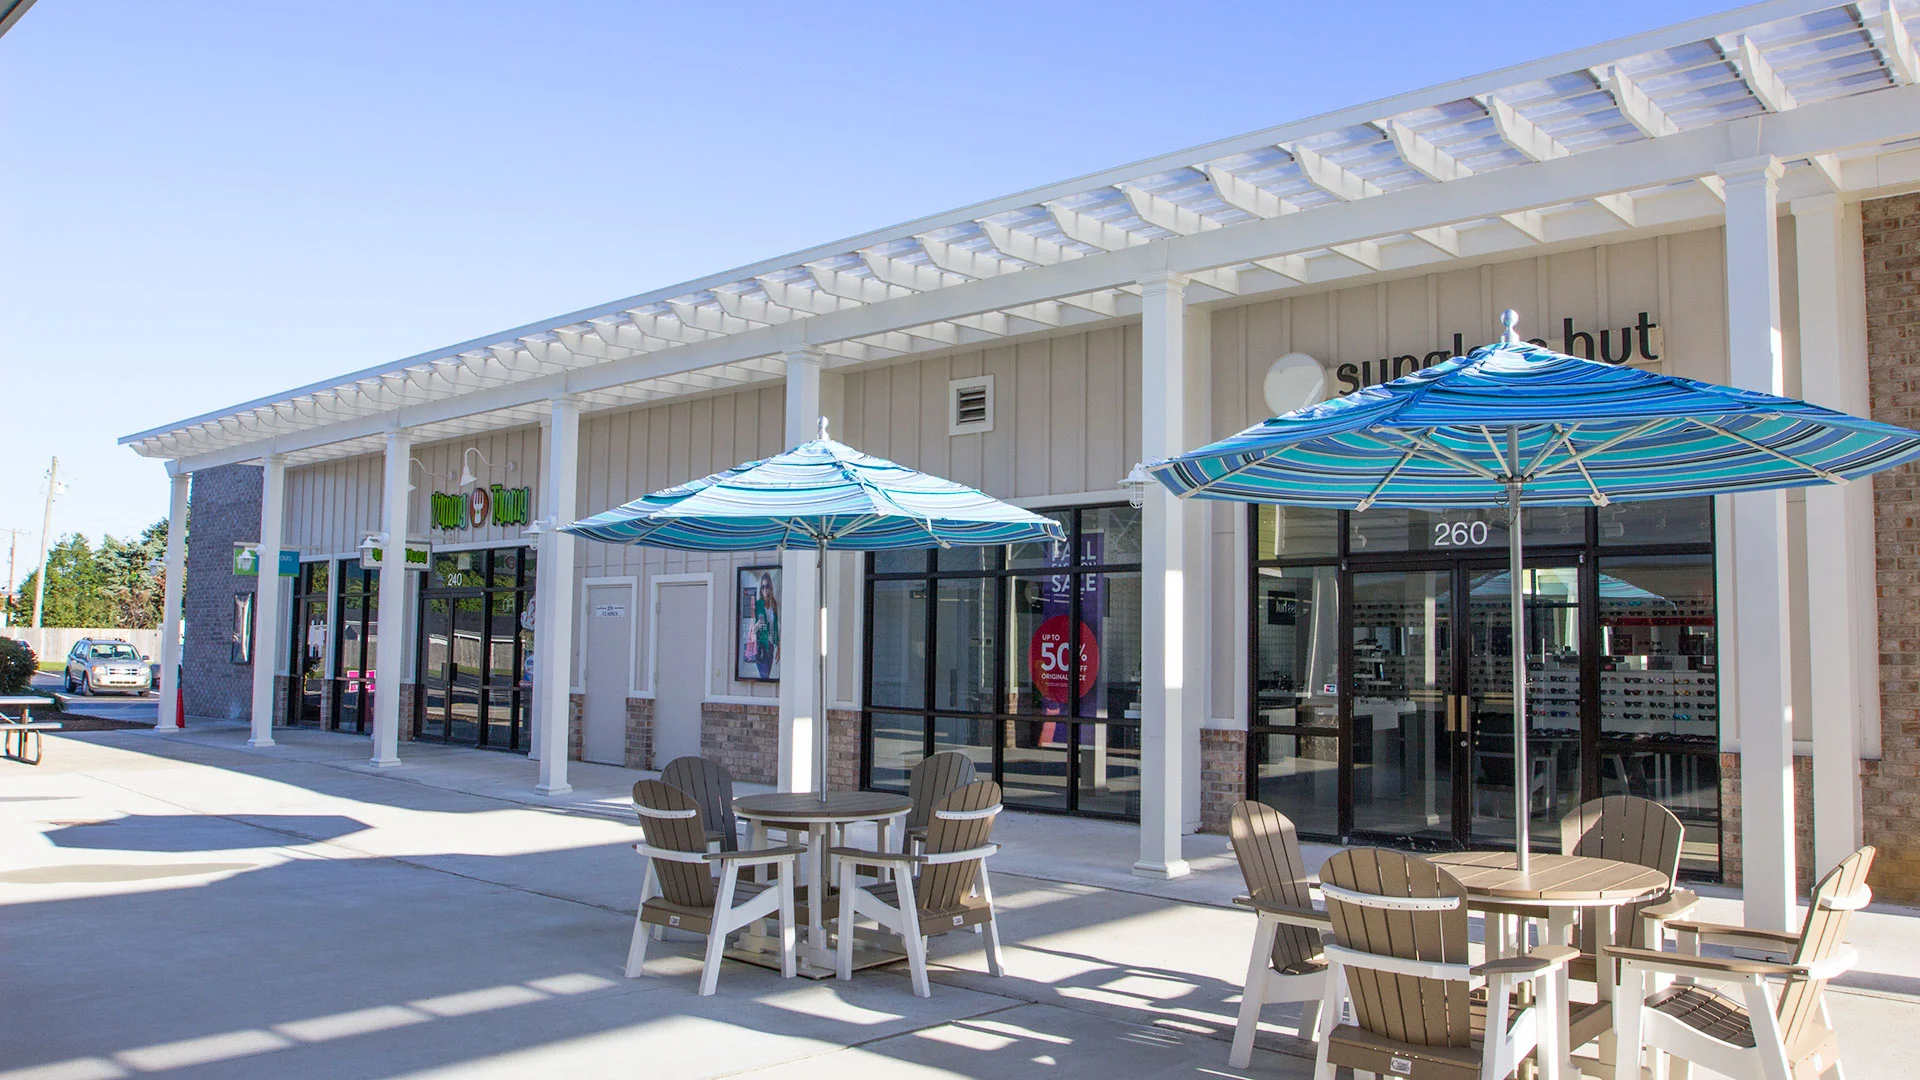 Featured image for “Tanger Outlets Bayside: Low Maintenance Trex Pergolas with Fixed Canopies”Project Overview: Rehoboth Beach’s 19-year-old outlets were recently renovated by Legacy Construction Services to keep the shopping center fresh. Looking to add depth to the12722:full